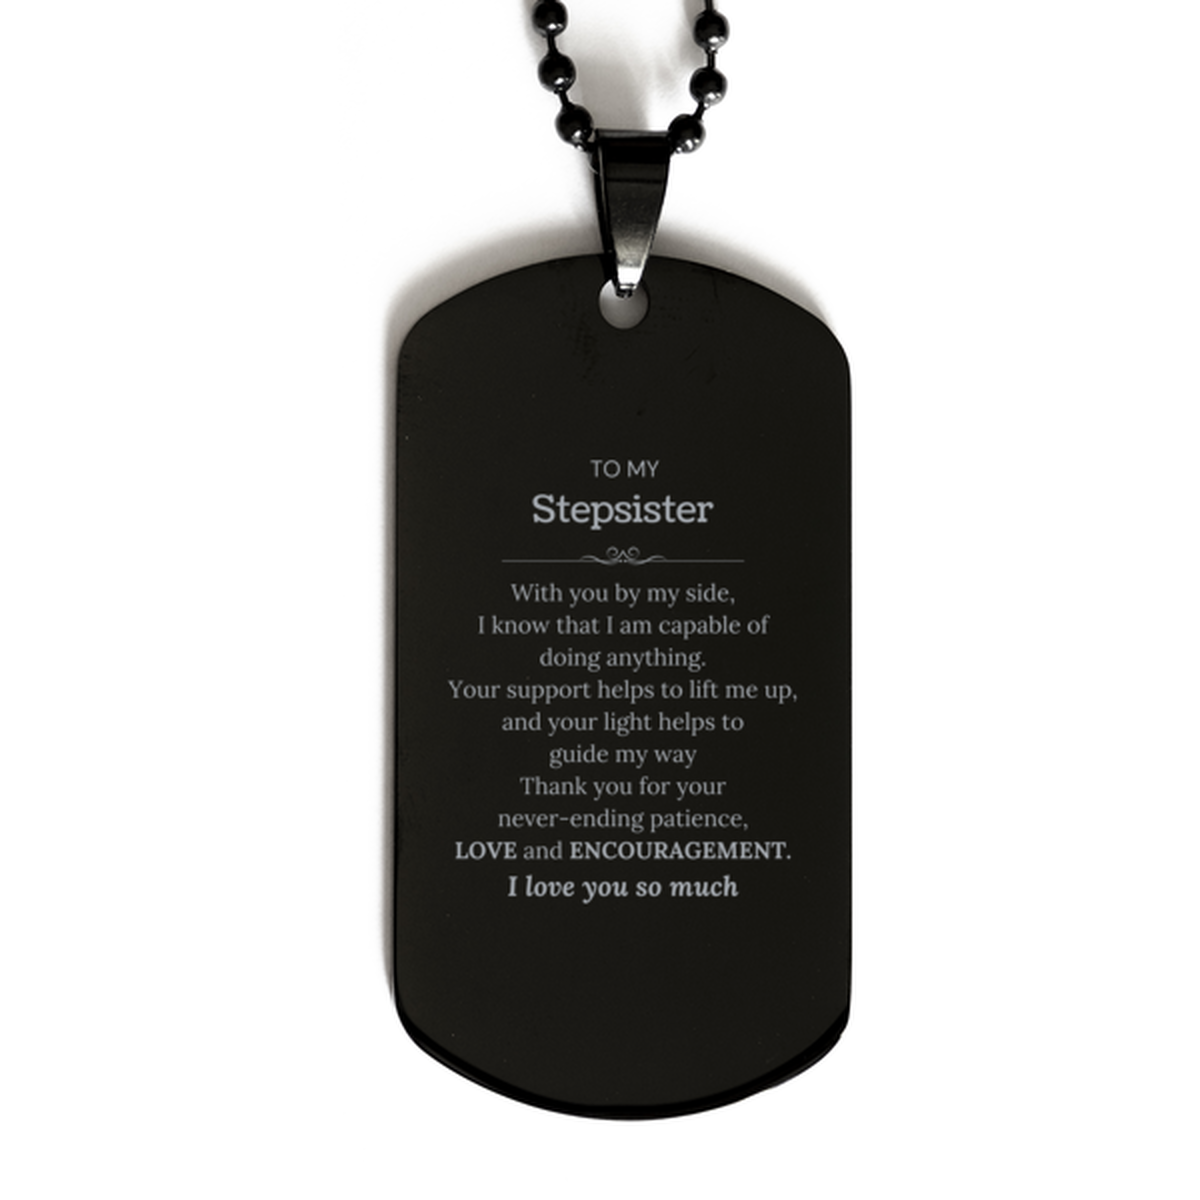 Appreciation Stepsister Black Dog Tag Gifts, To My Stepsister Birthday Christmas Wedding Keepsake Gifts for Stepsister With you by my side, I know that I am capable of doing anything. I love you so much